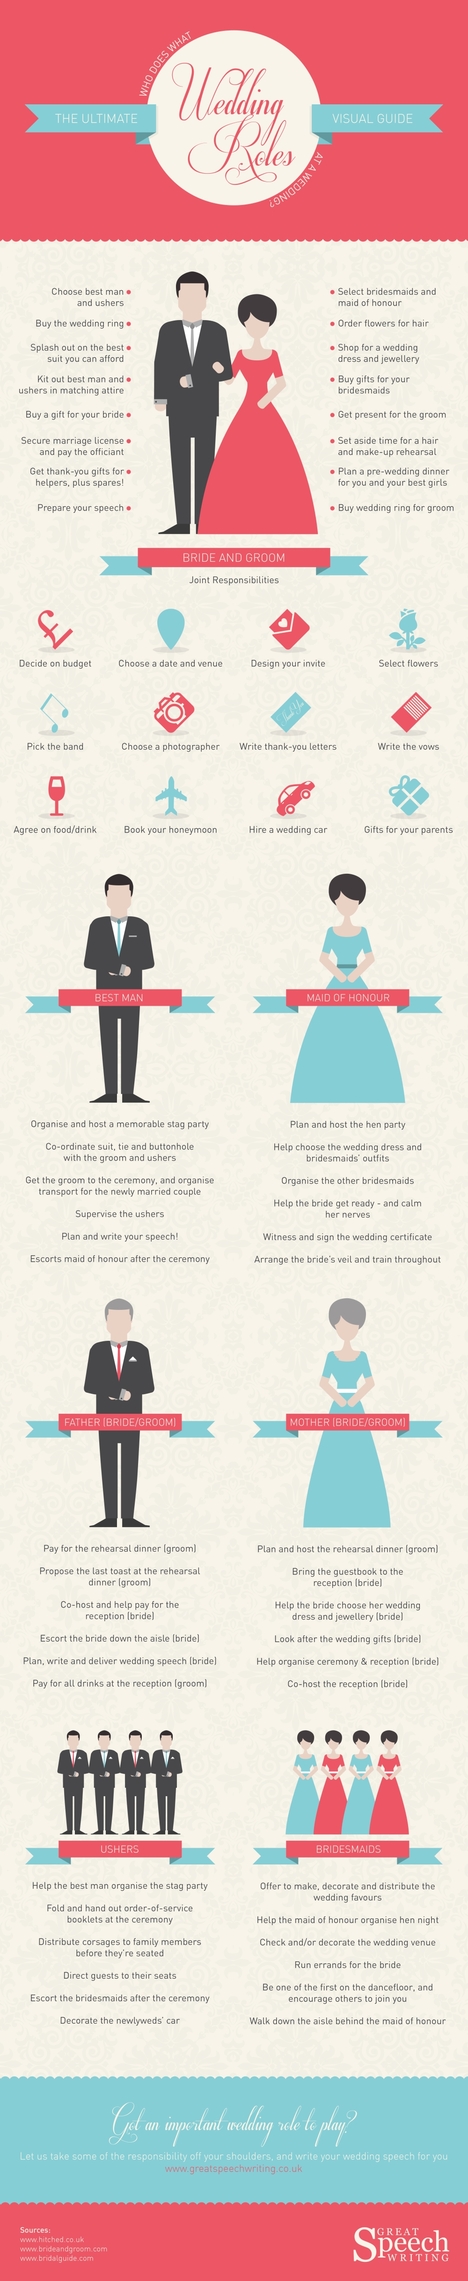 Guide to Who Does What at a Wedding